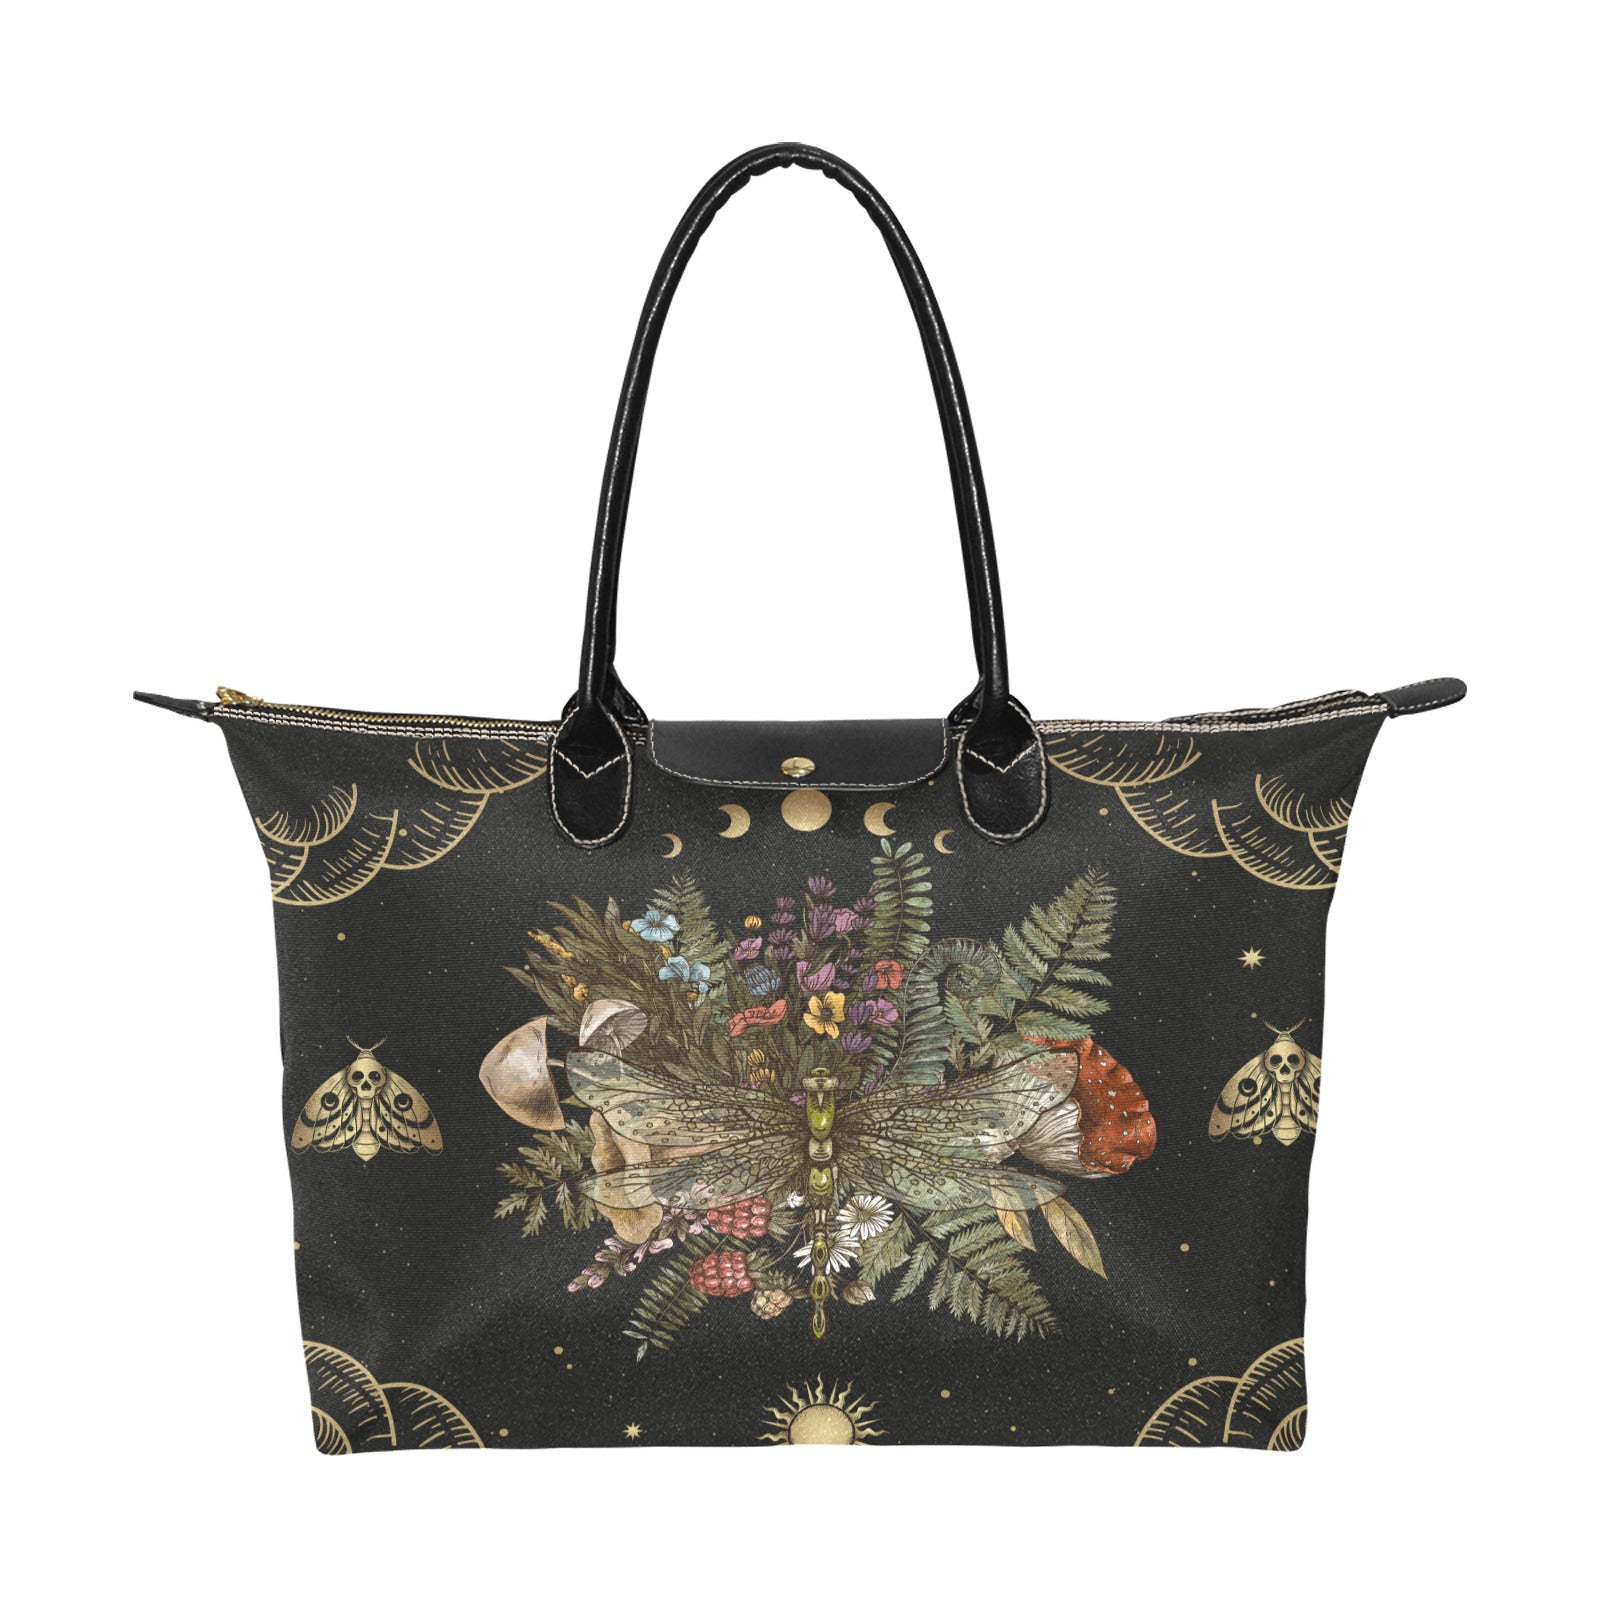 Dragonfly Mushrooms Flowers Pattern Style Leather Bag - Gifts